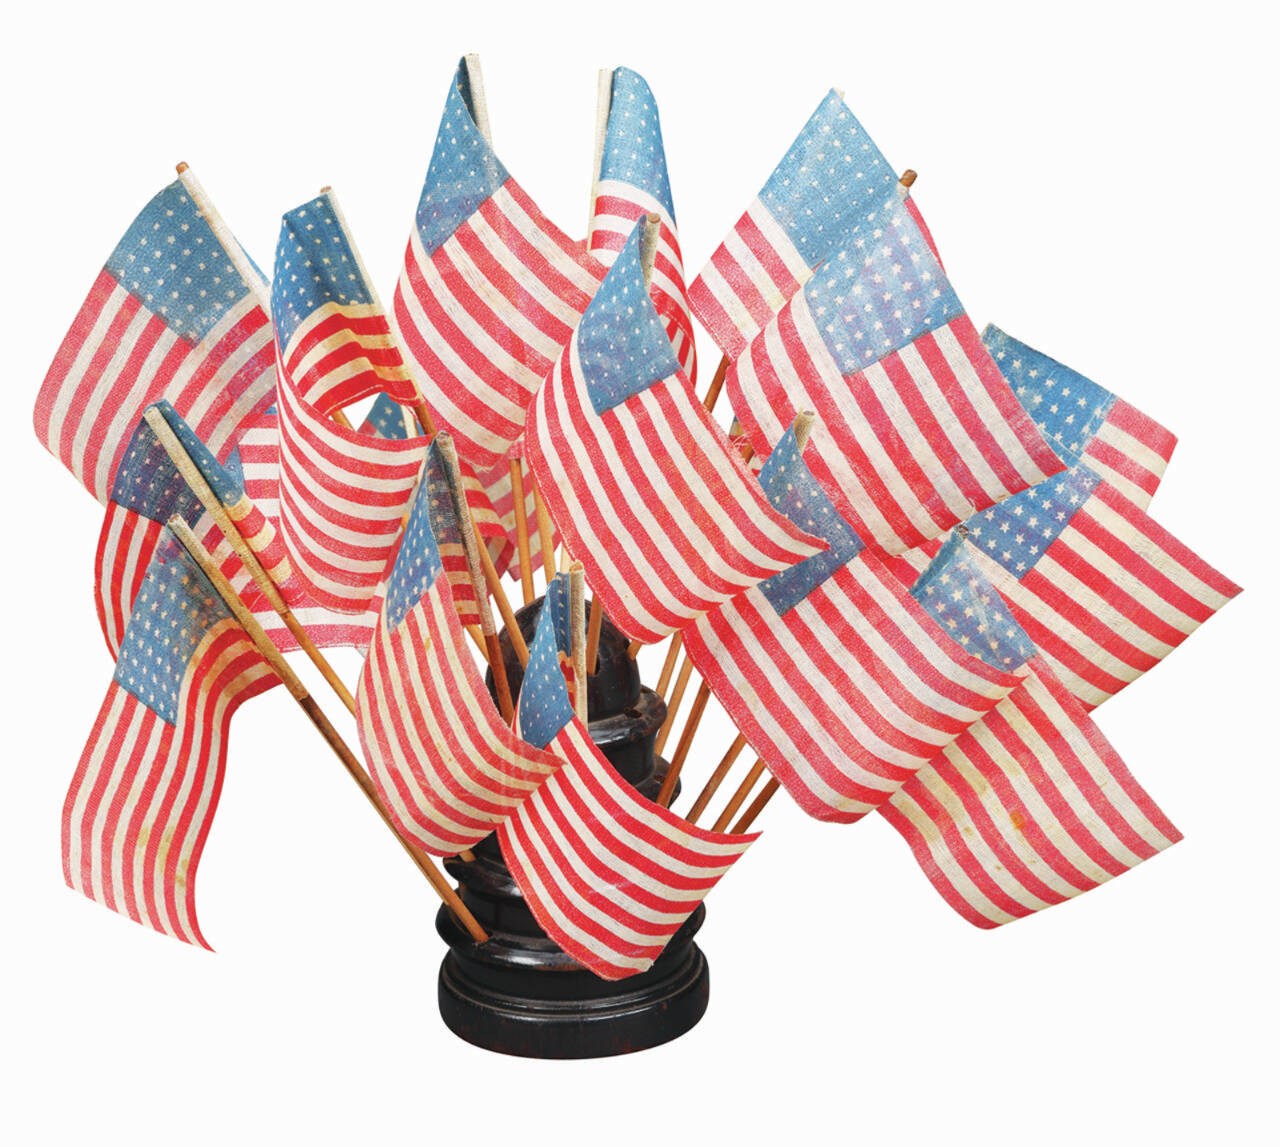 Labor Day celebrates American workers with picnics, parades and patriotic decorations. Past parade spectators may have carried flags like these.